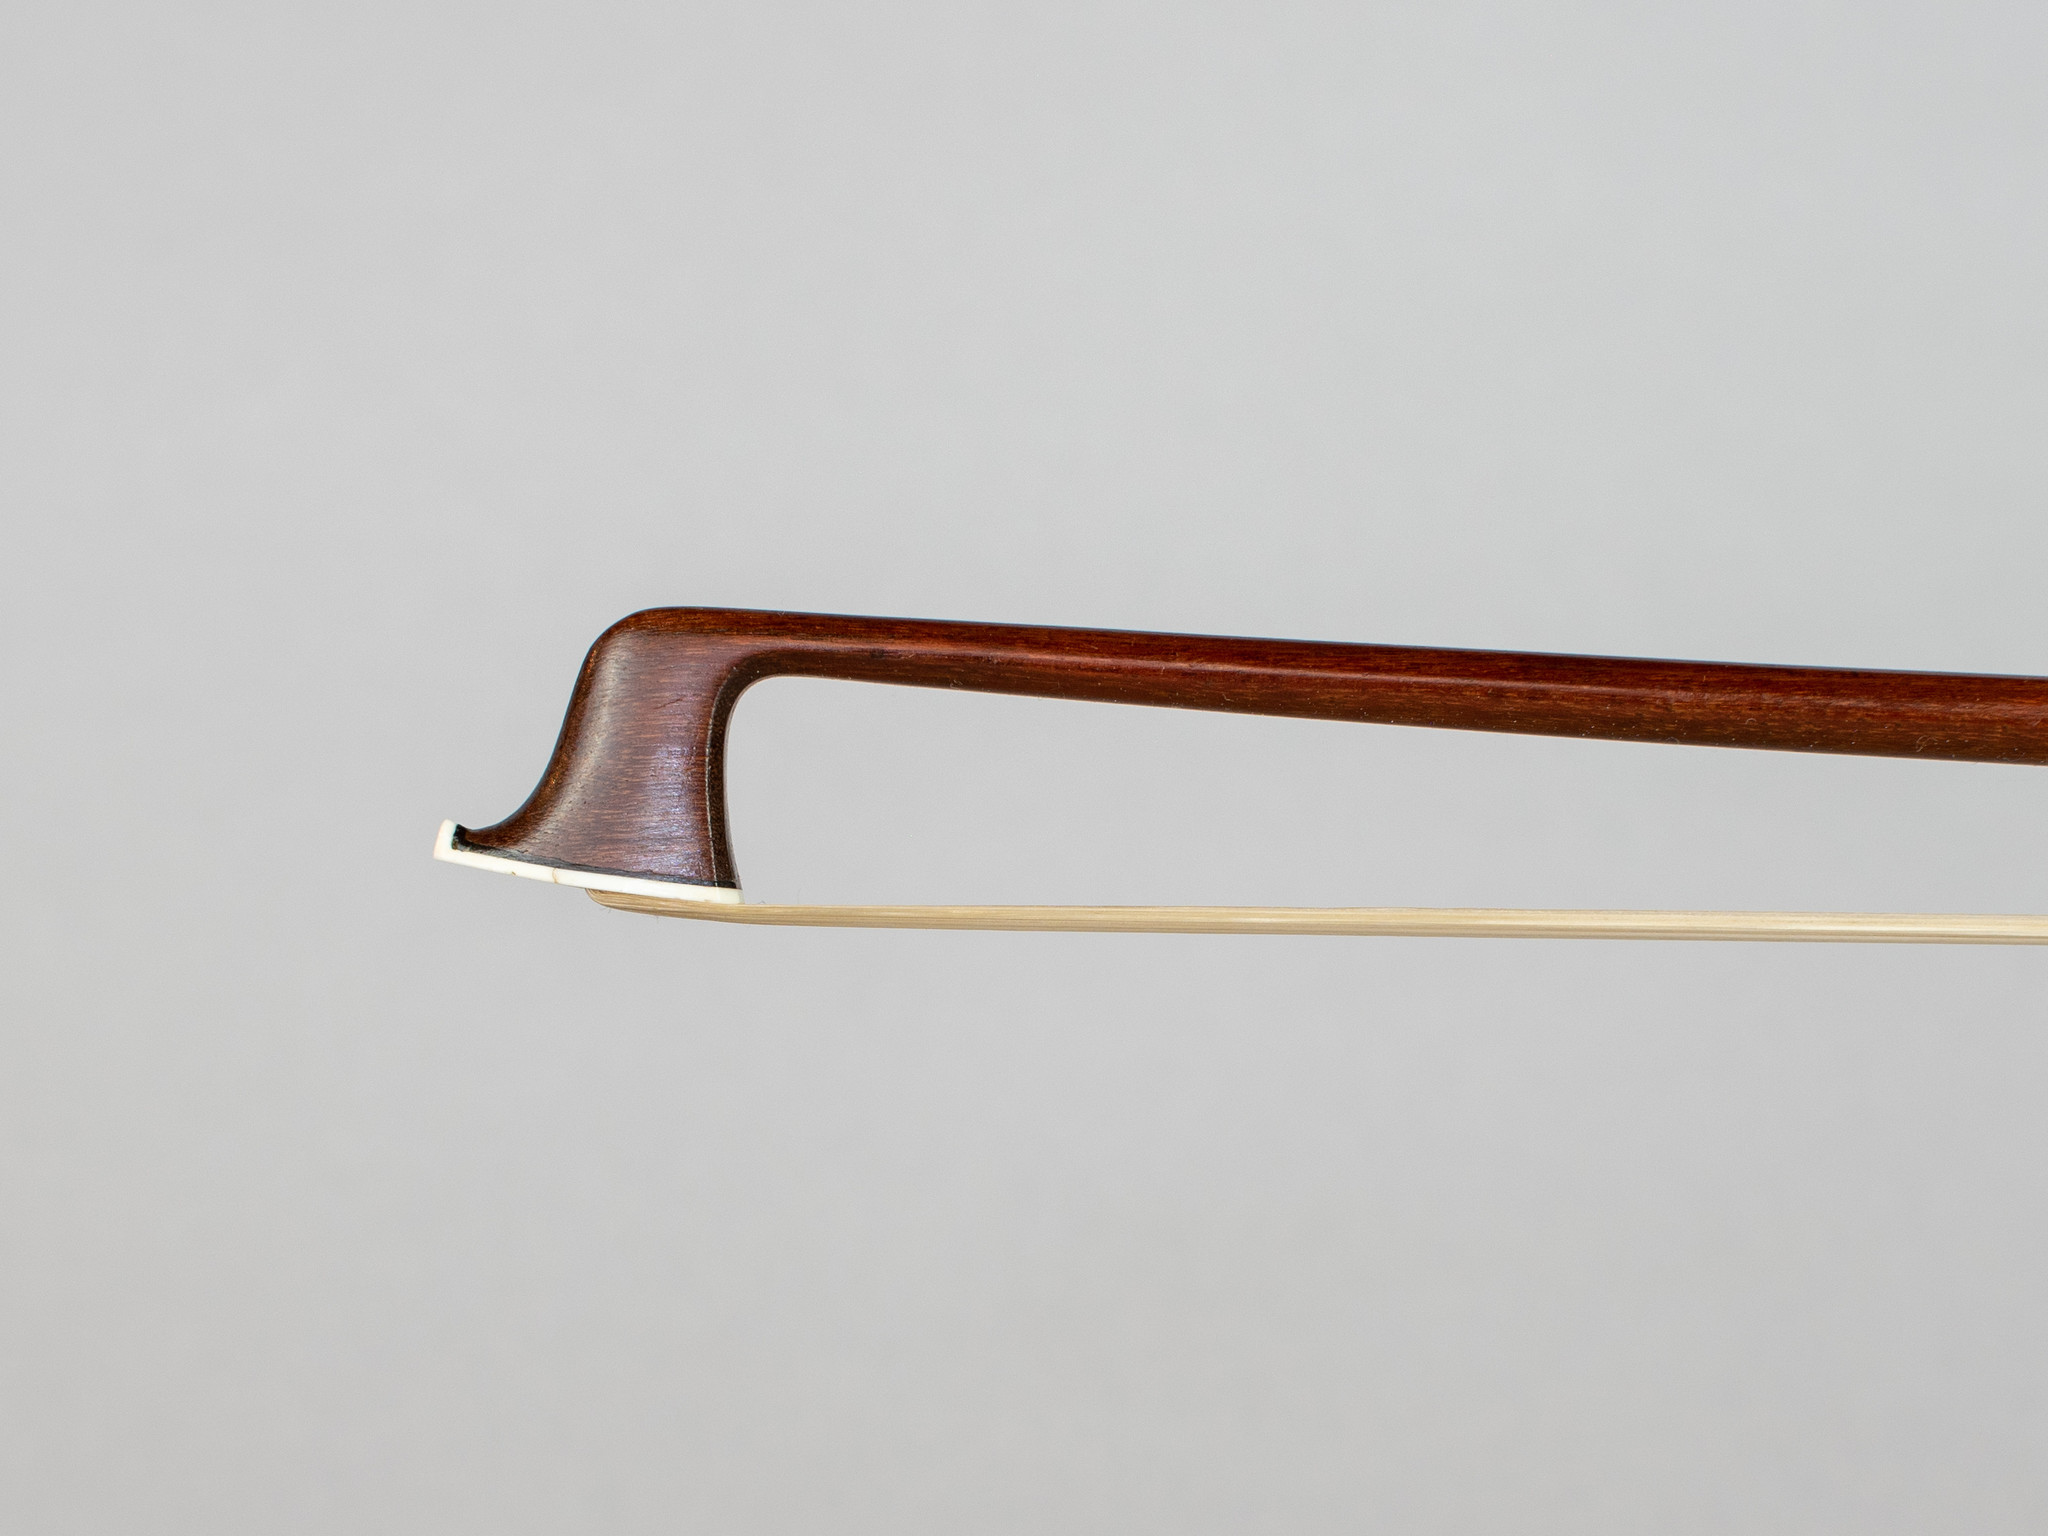 H.R. PFRETZSCHNER round, gold-mounted violin bow, ca 1900, GERMANY